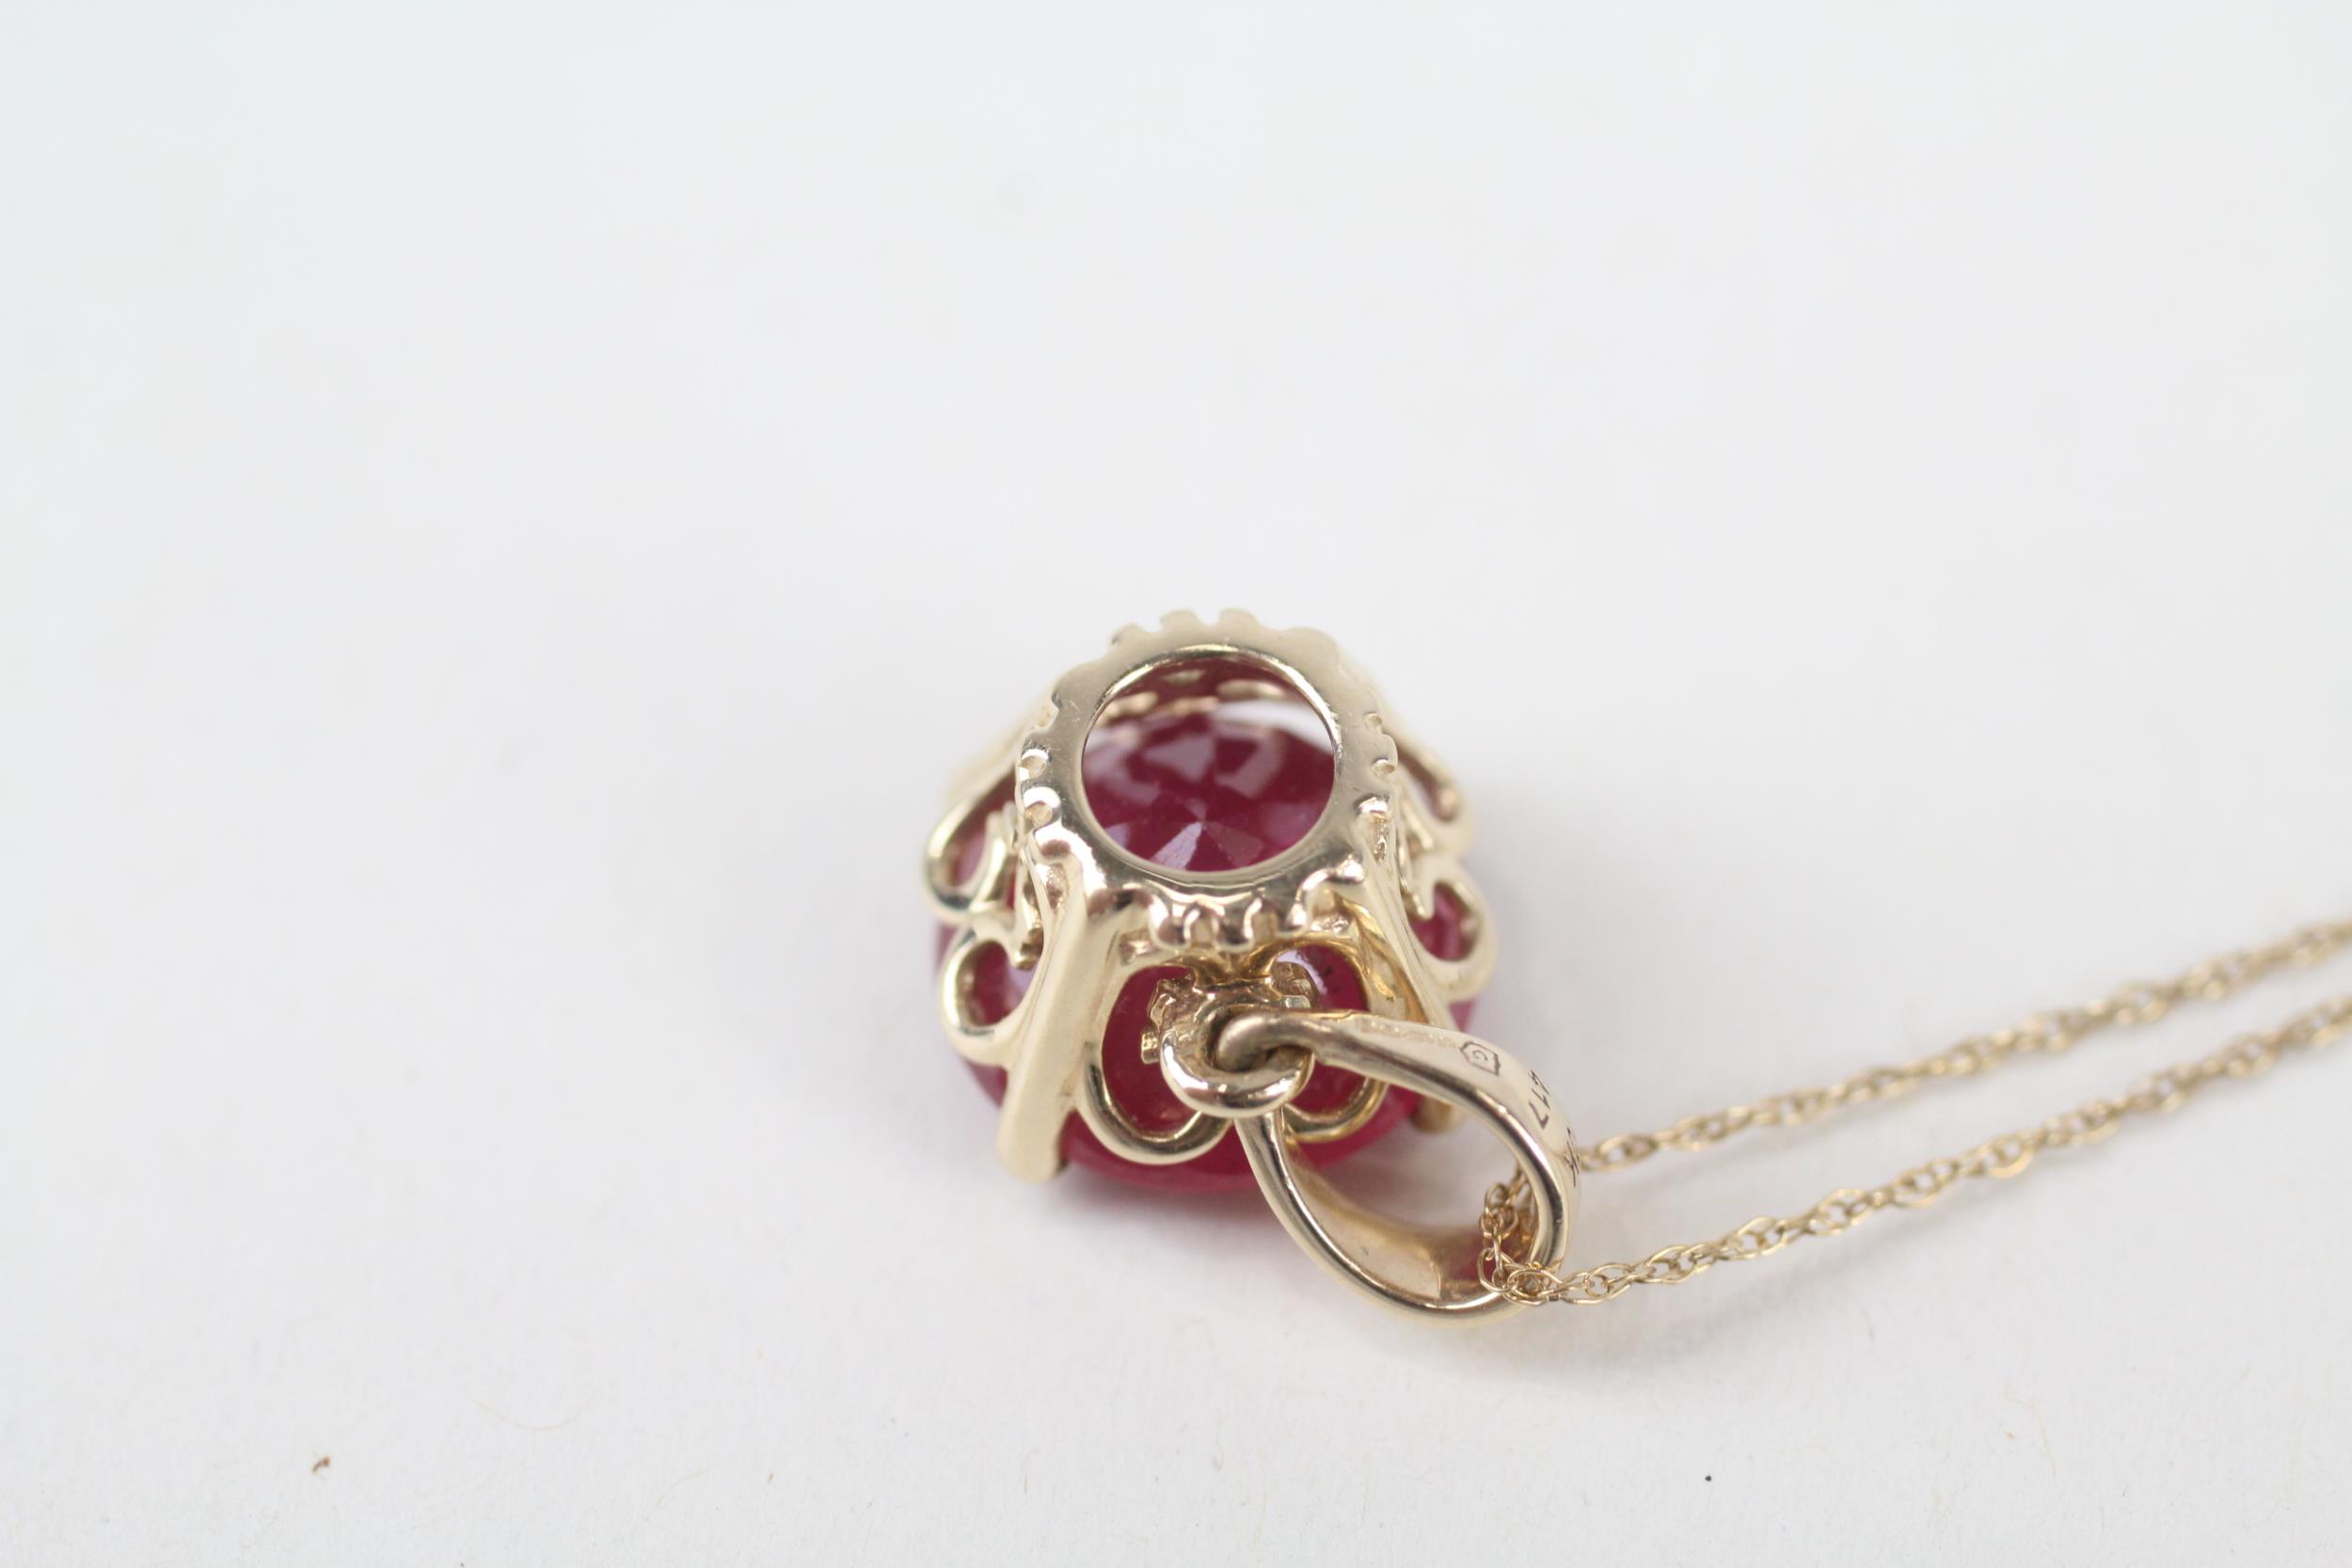 9ct gold red gemstone pendant necklace 3.1 g - Image 4 of 4